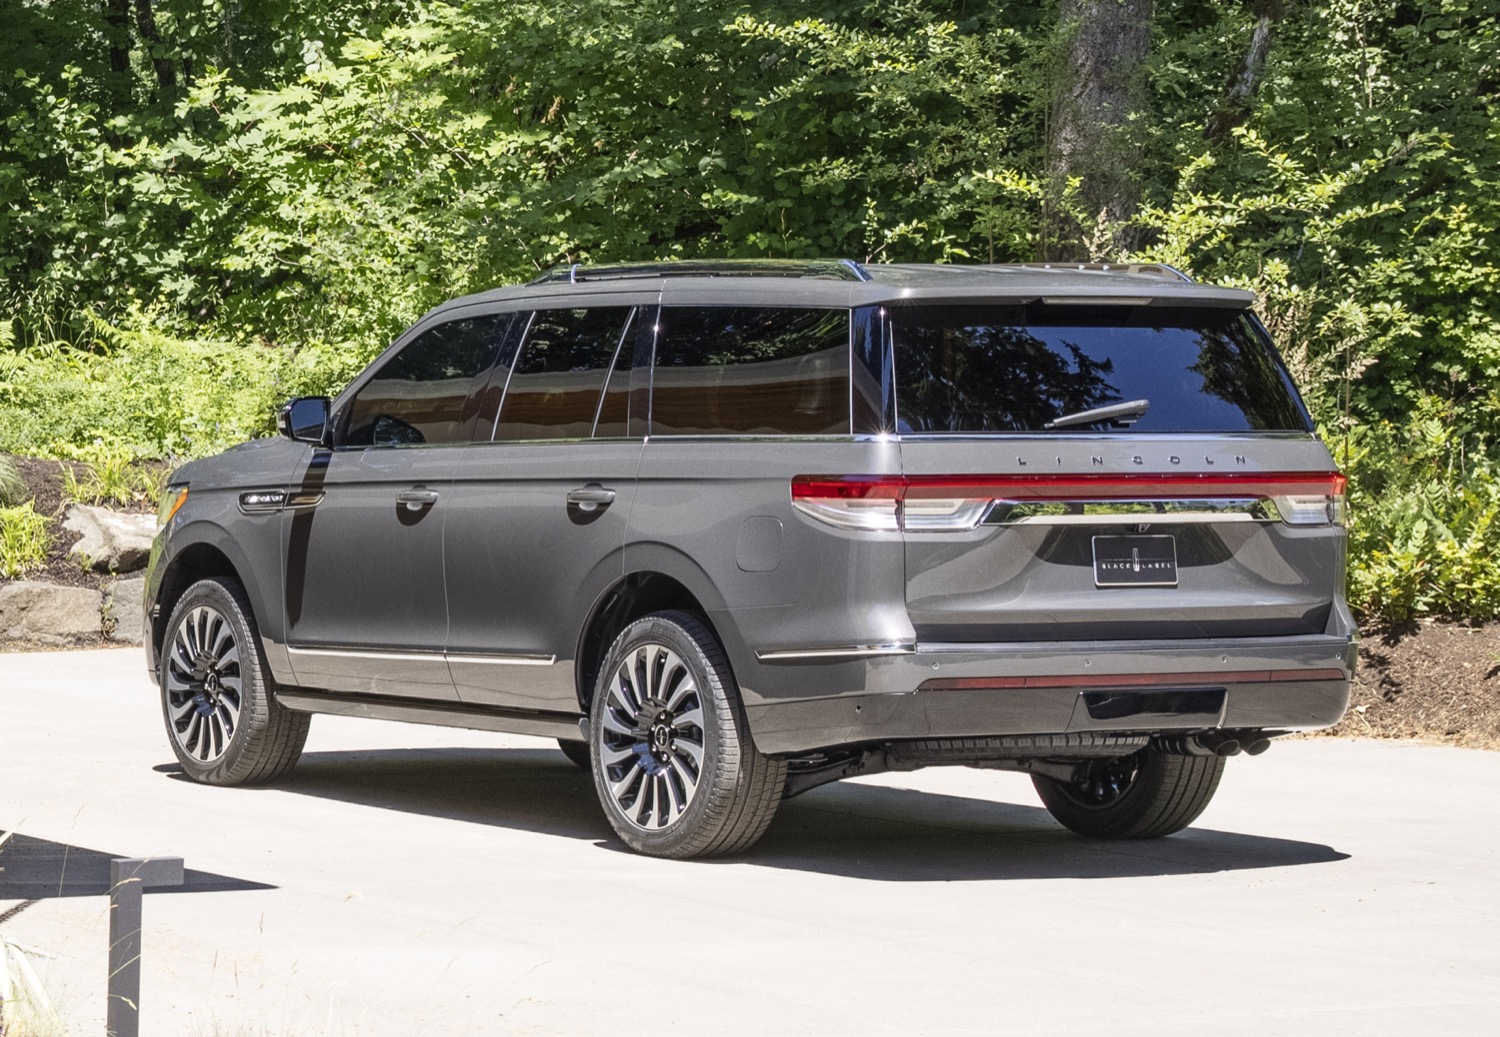 2022 Lincoln Navigator Base Trim Spied For The First Time